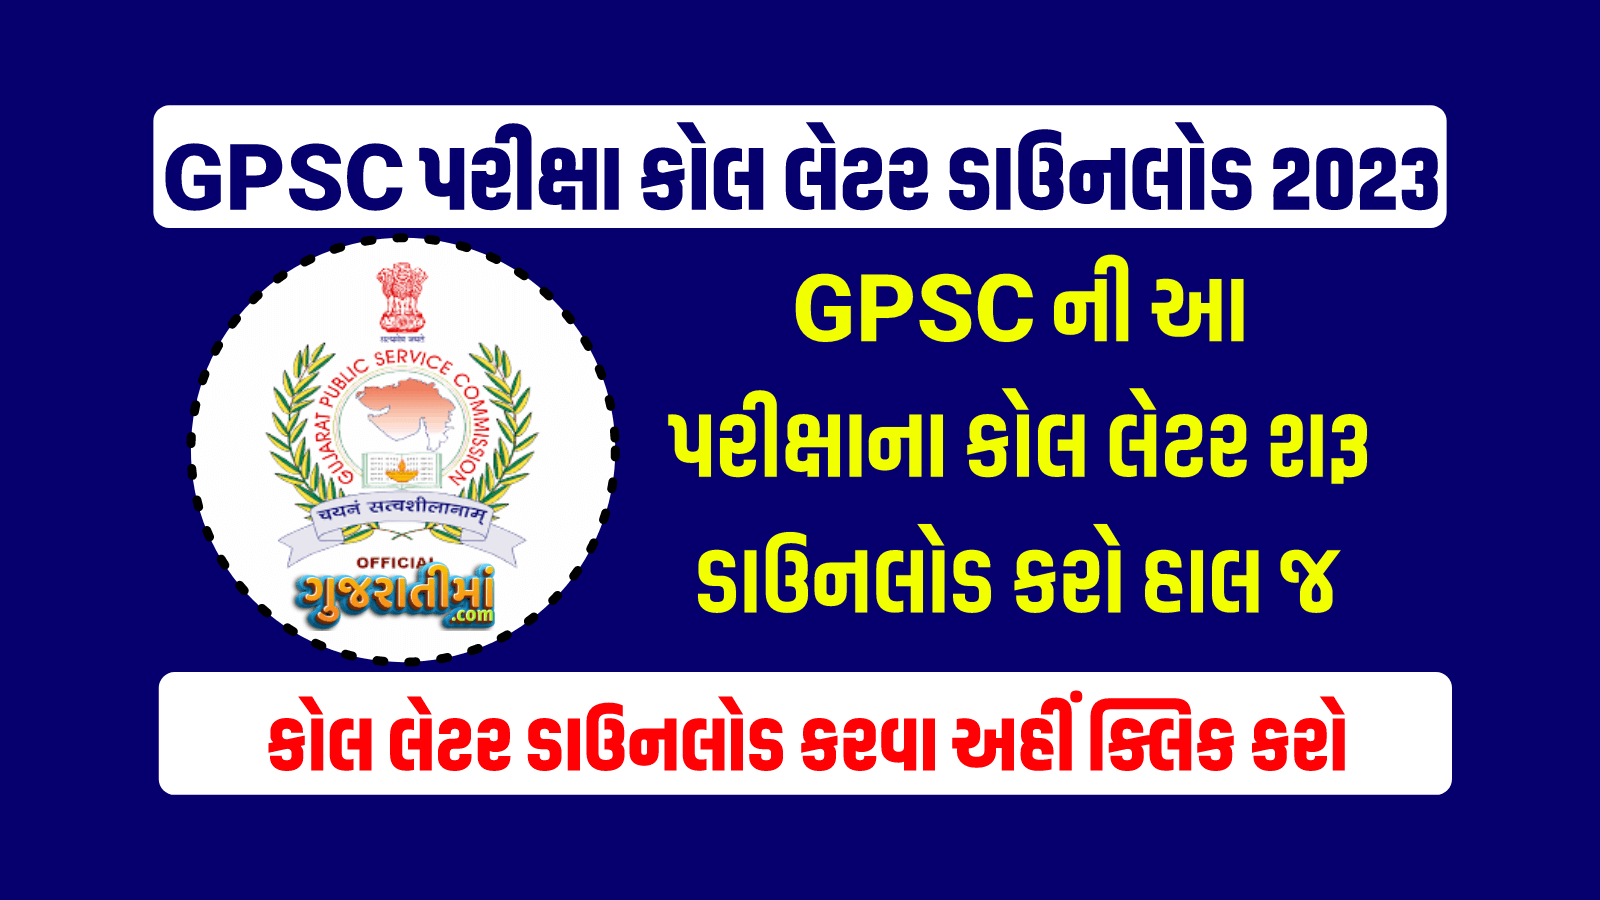 gpsc call later download